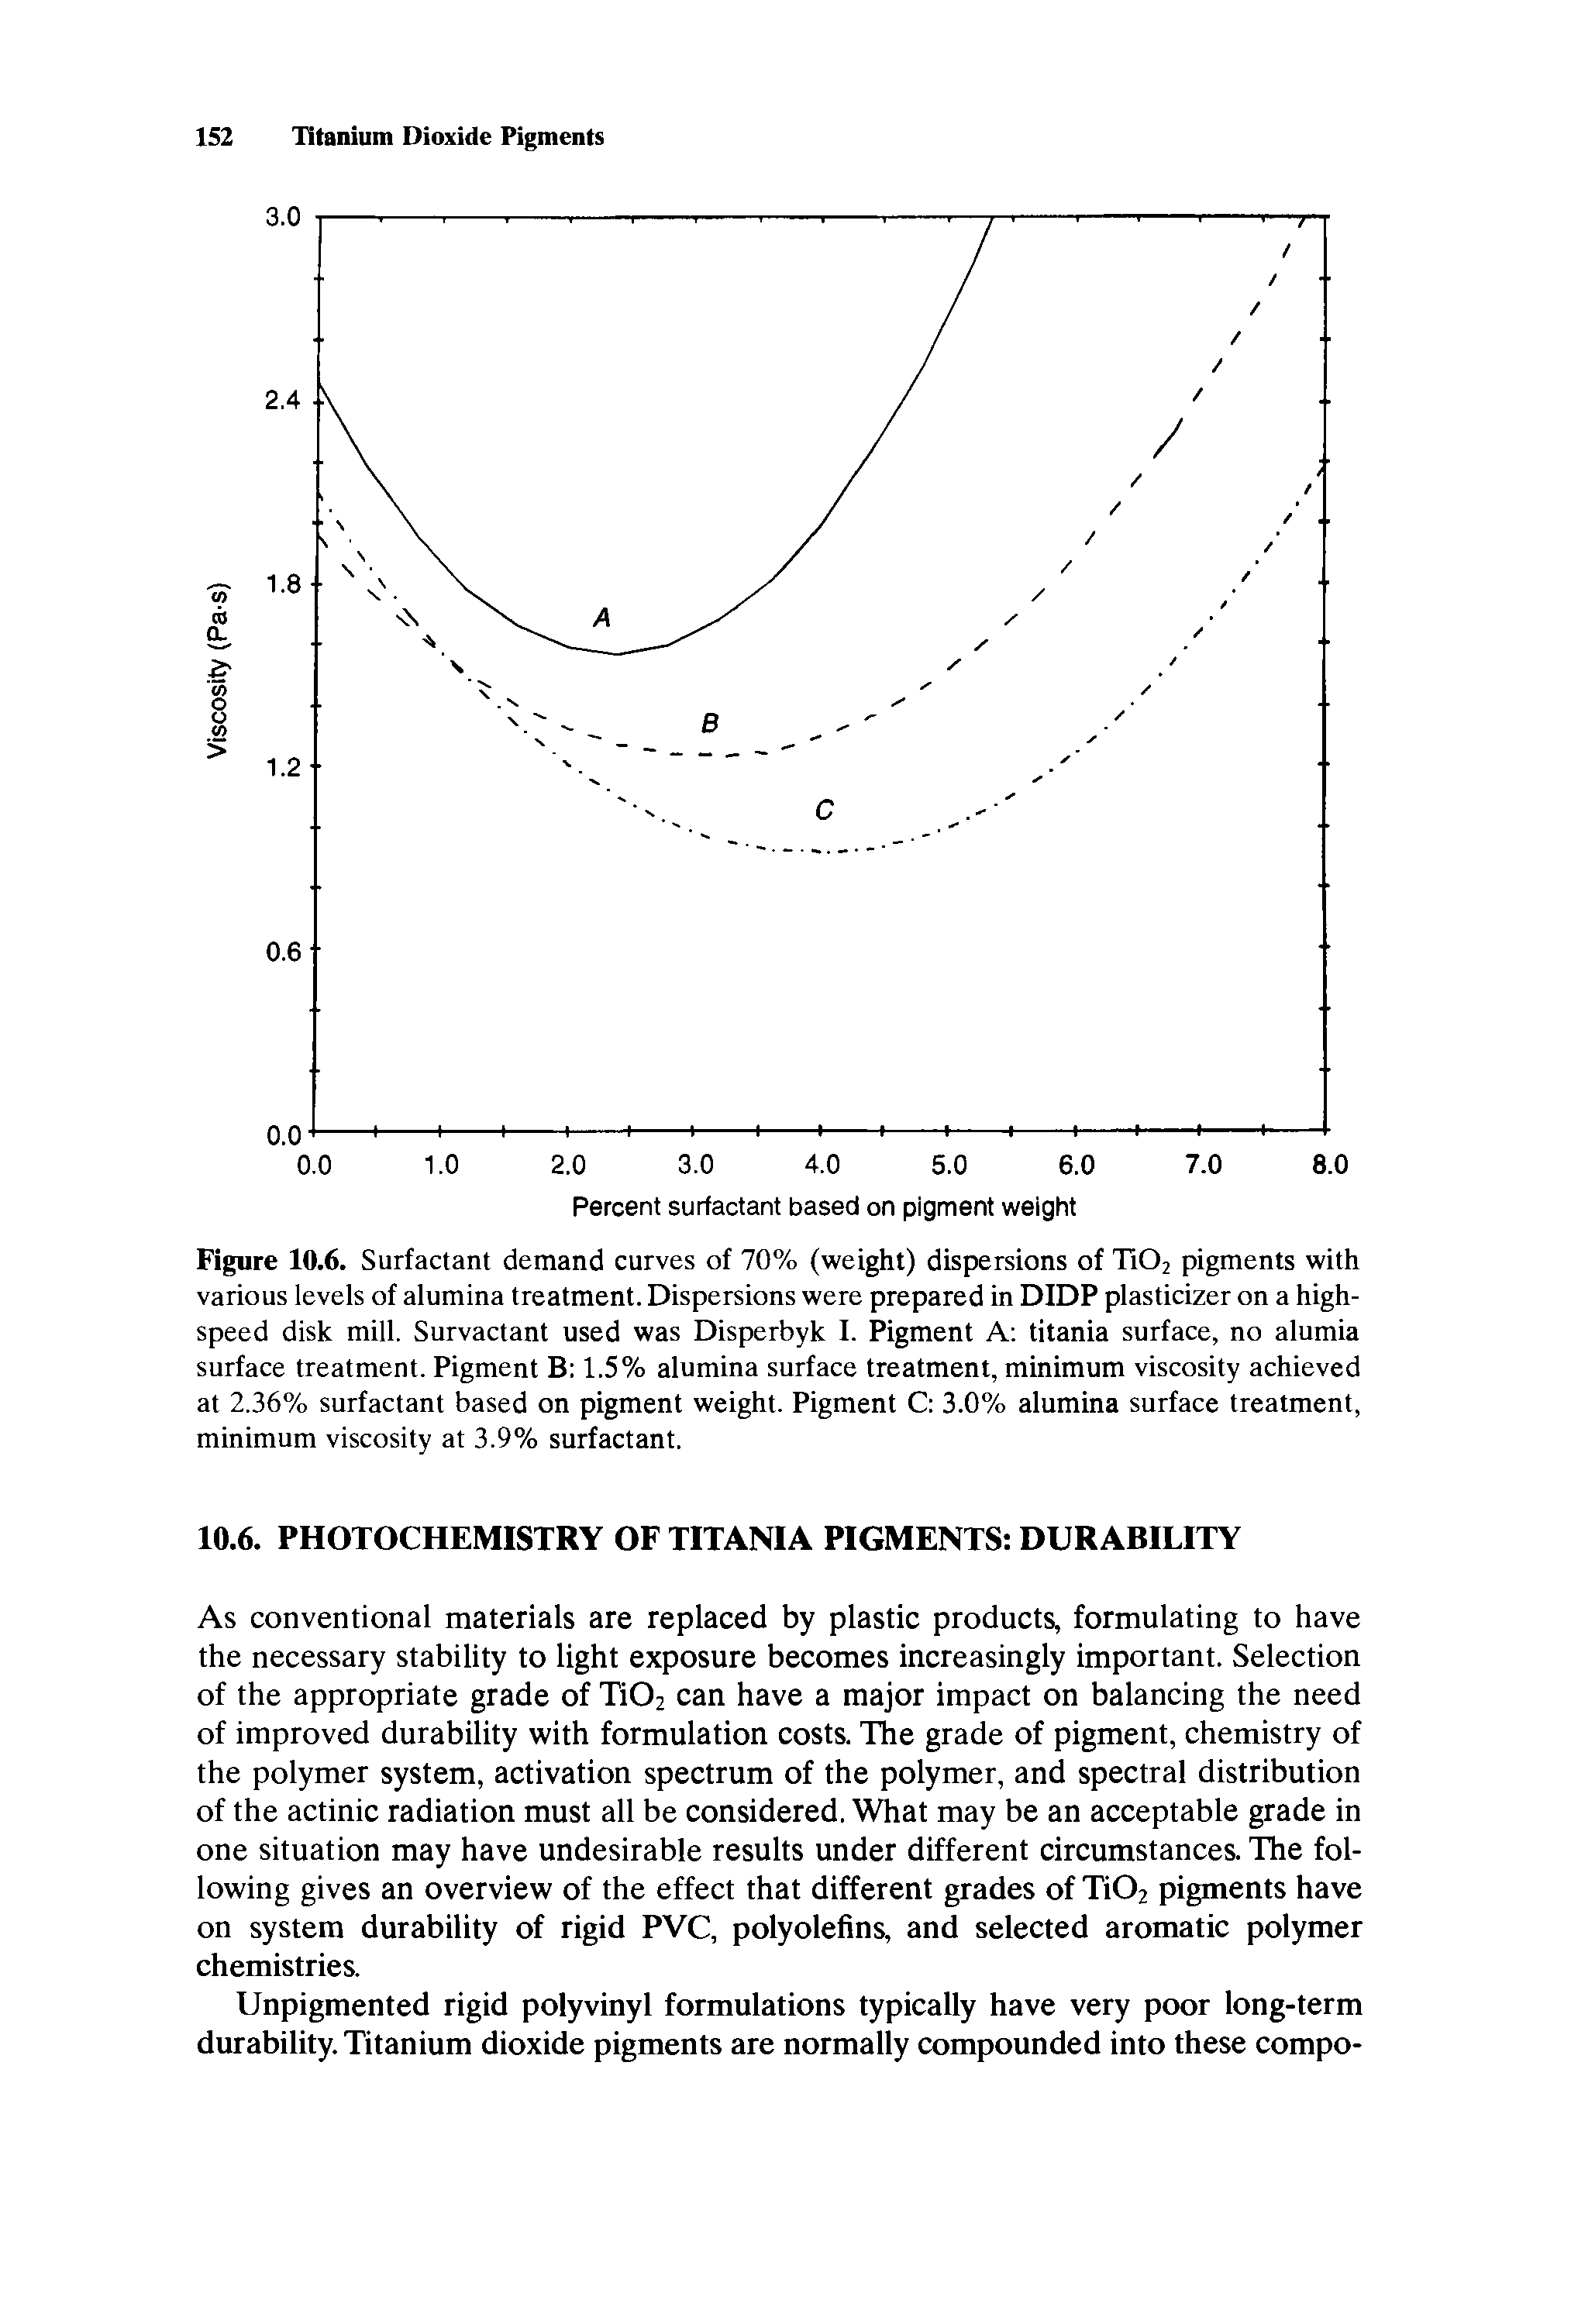 Figure 10.6. Surfactant demand curves of 70% (weight) dispersions of Ti02 pigments with various levels of alumina treatment. Dispersions were prepared in DIDP plasticizer on a highspeed disk mill. Survactant used was Disperbyk I. Pigment A titania surface, no alumia surface treatment. Pigment B 1.5% alumina surface treatment, minimum viscosity achieved at 2.36% surfactant based on pigment weight. Pigment C 3.0% alumina surface treatment, minimum viscosity at 3.9% surfactant.